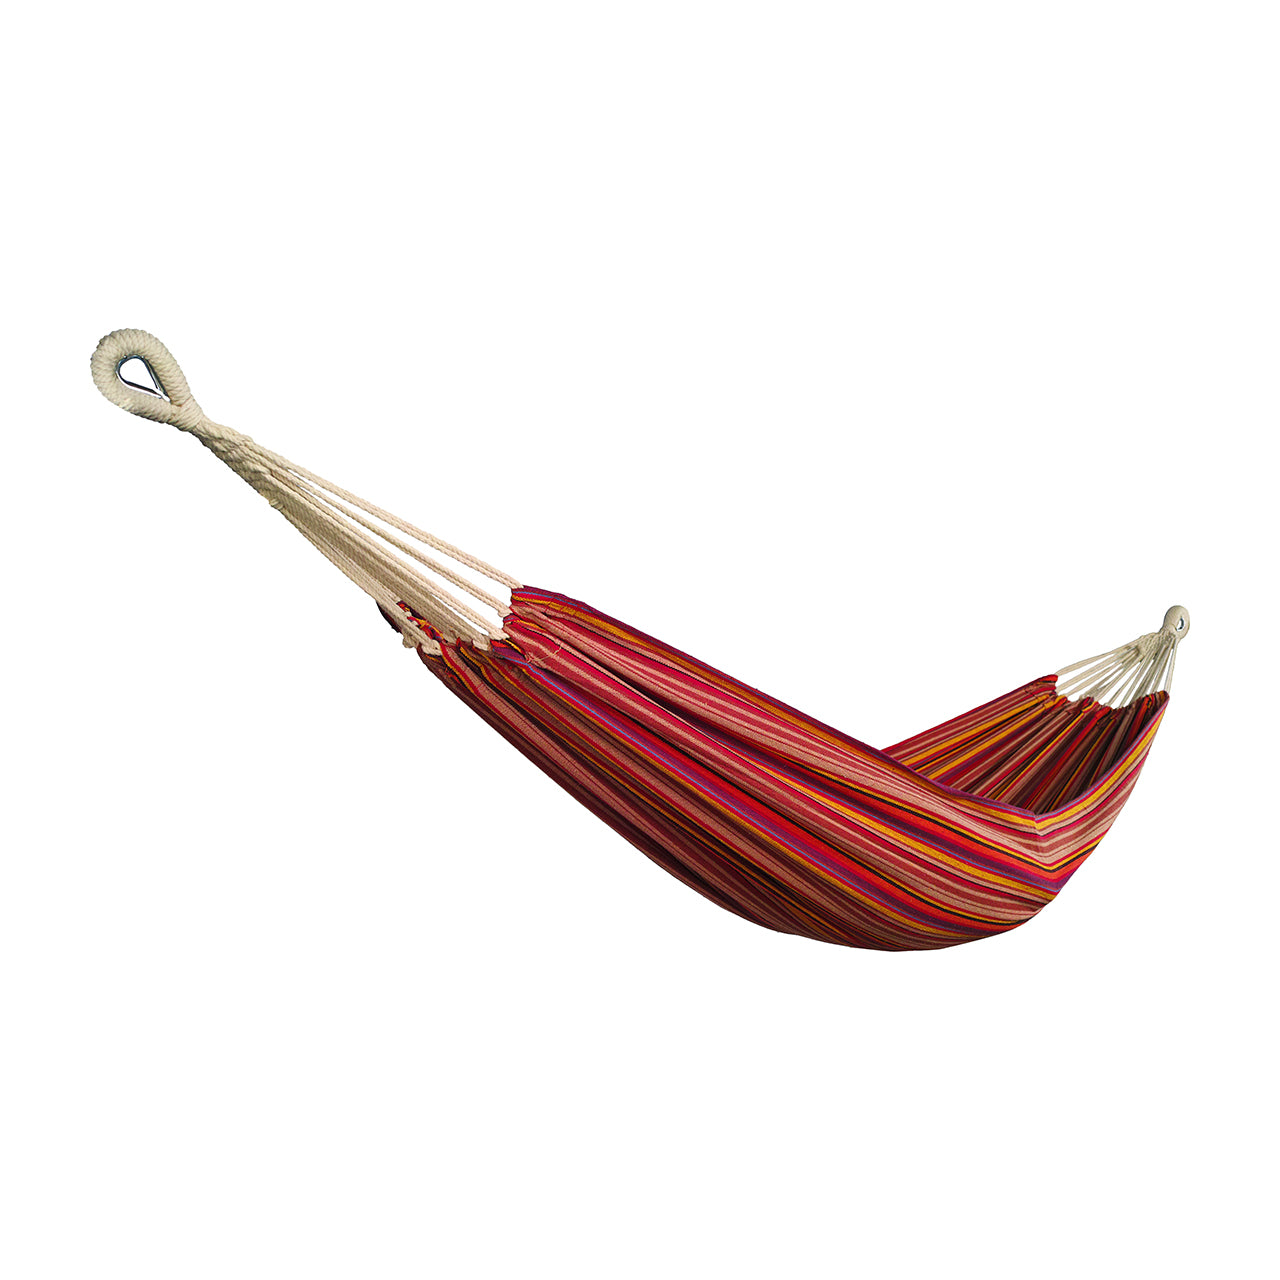 Bliss Hammocks 40-inch Wide Hammock in a Bag with Hand-woven Rope loops in the toasted almond variation.